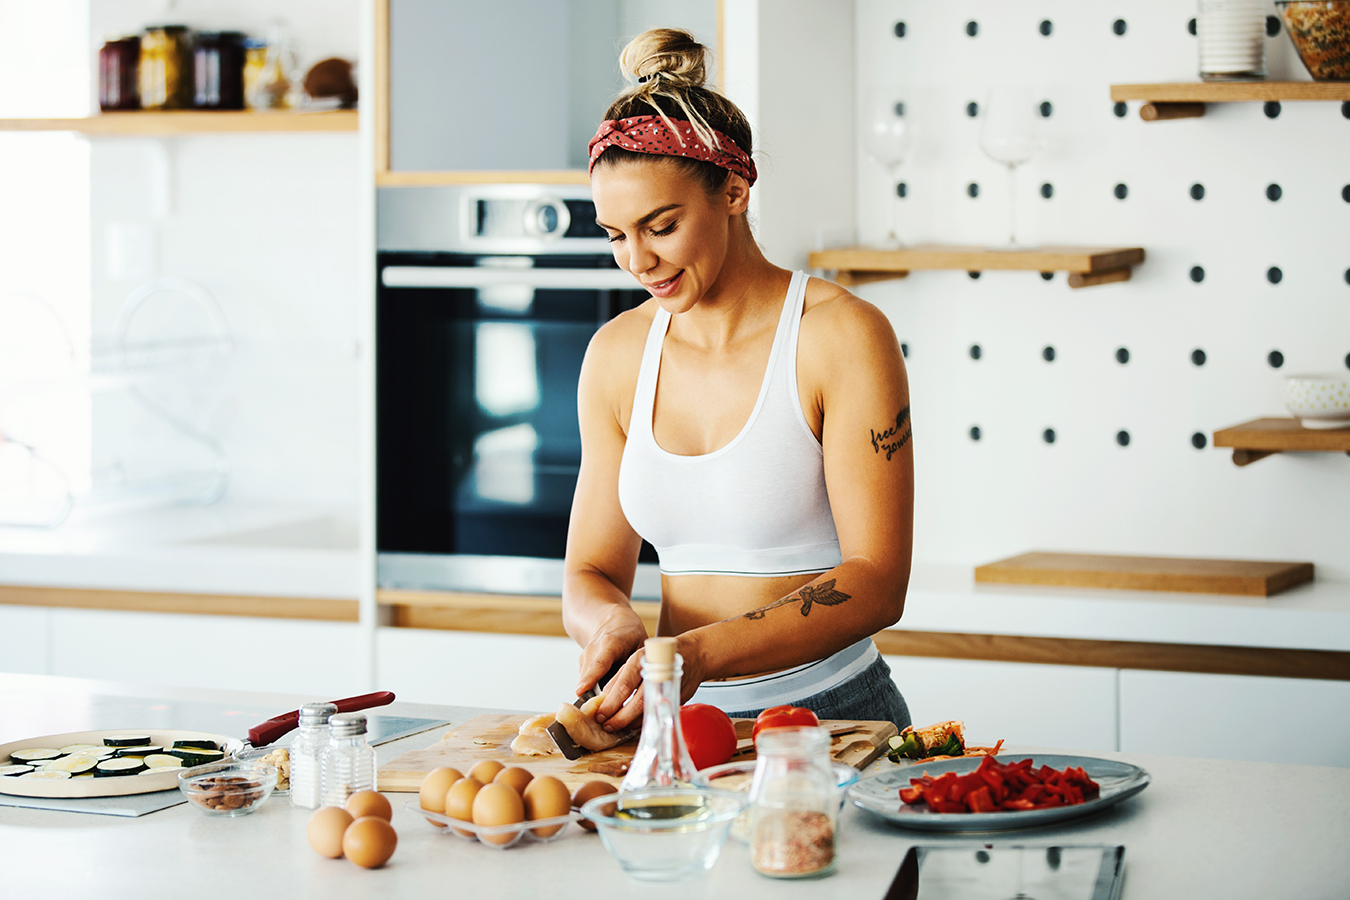 Young athletic woman preparing pre-workout meal in the kitchen.